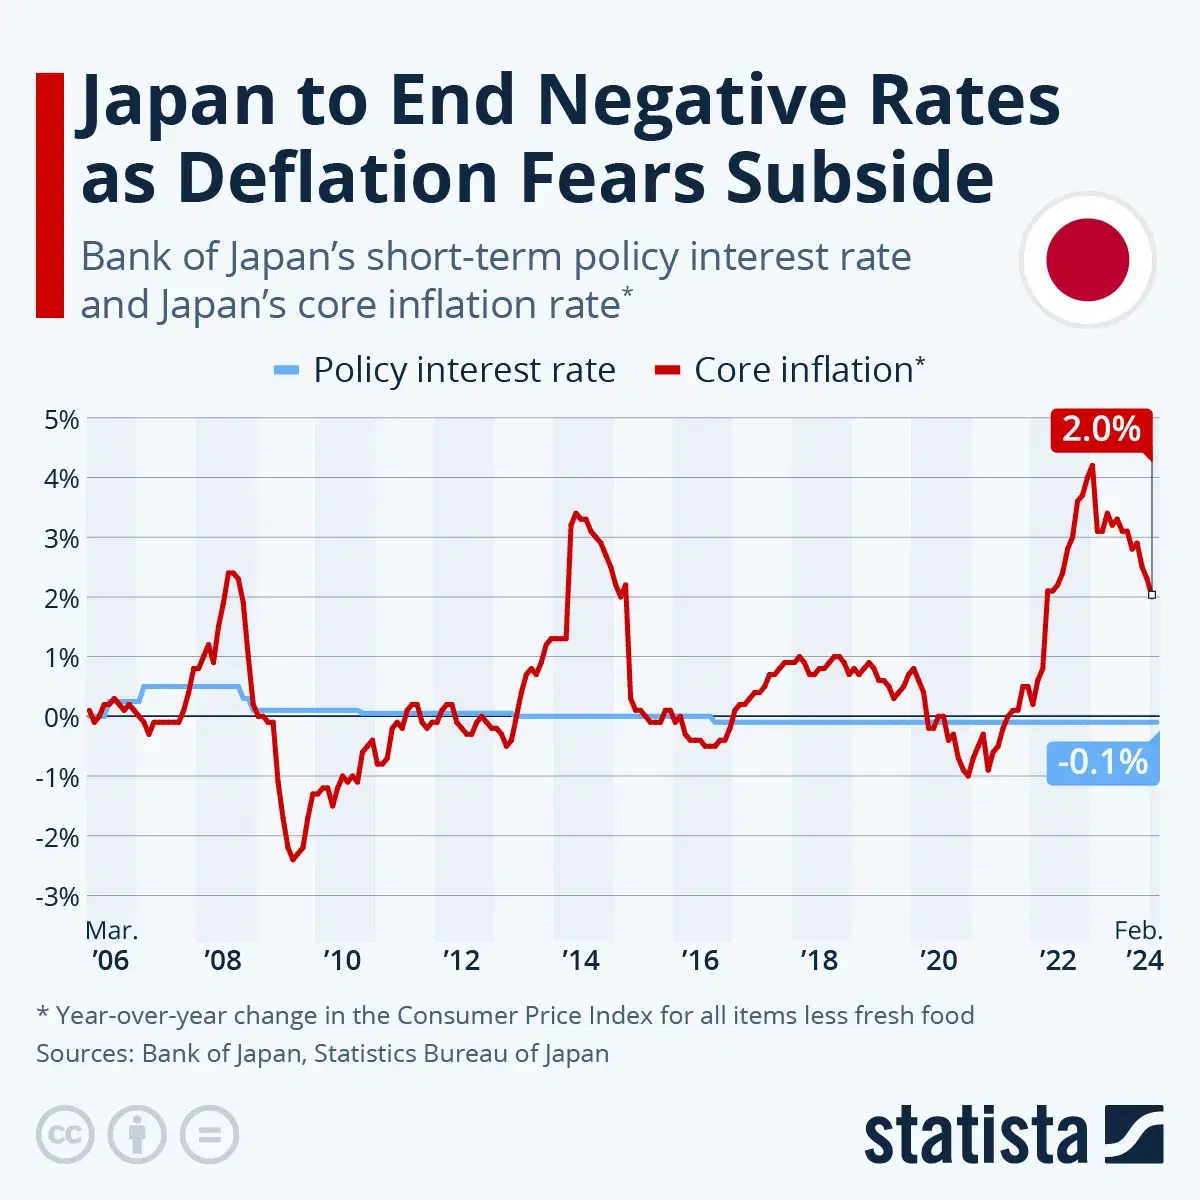 Japan to End Negative Rates as Deflation Fears Subside